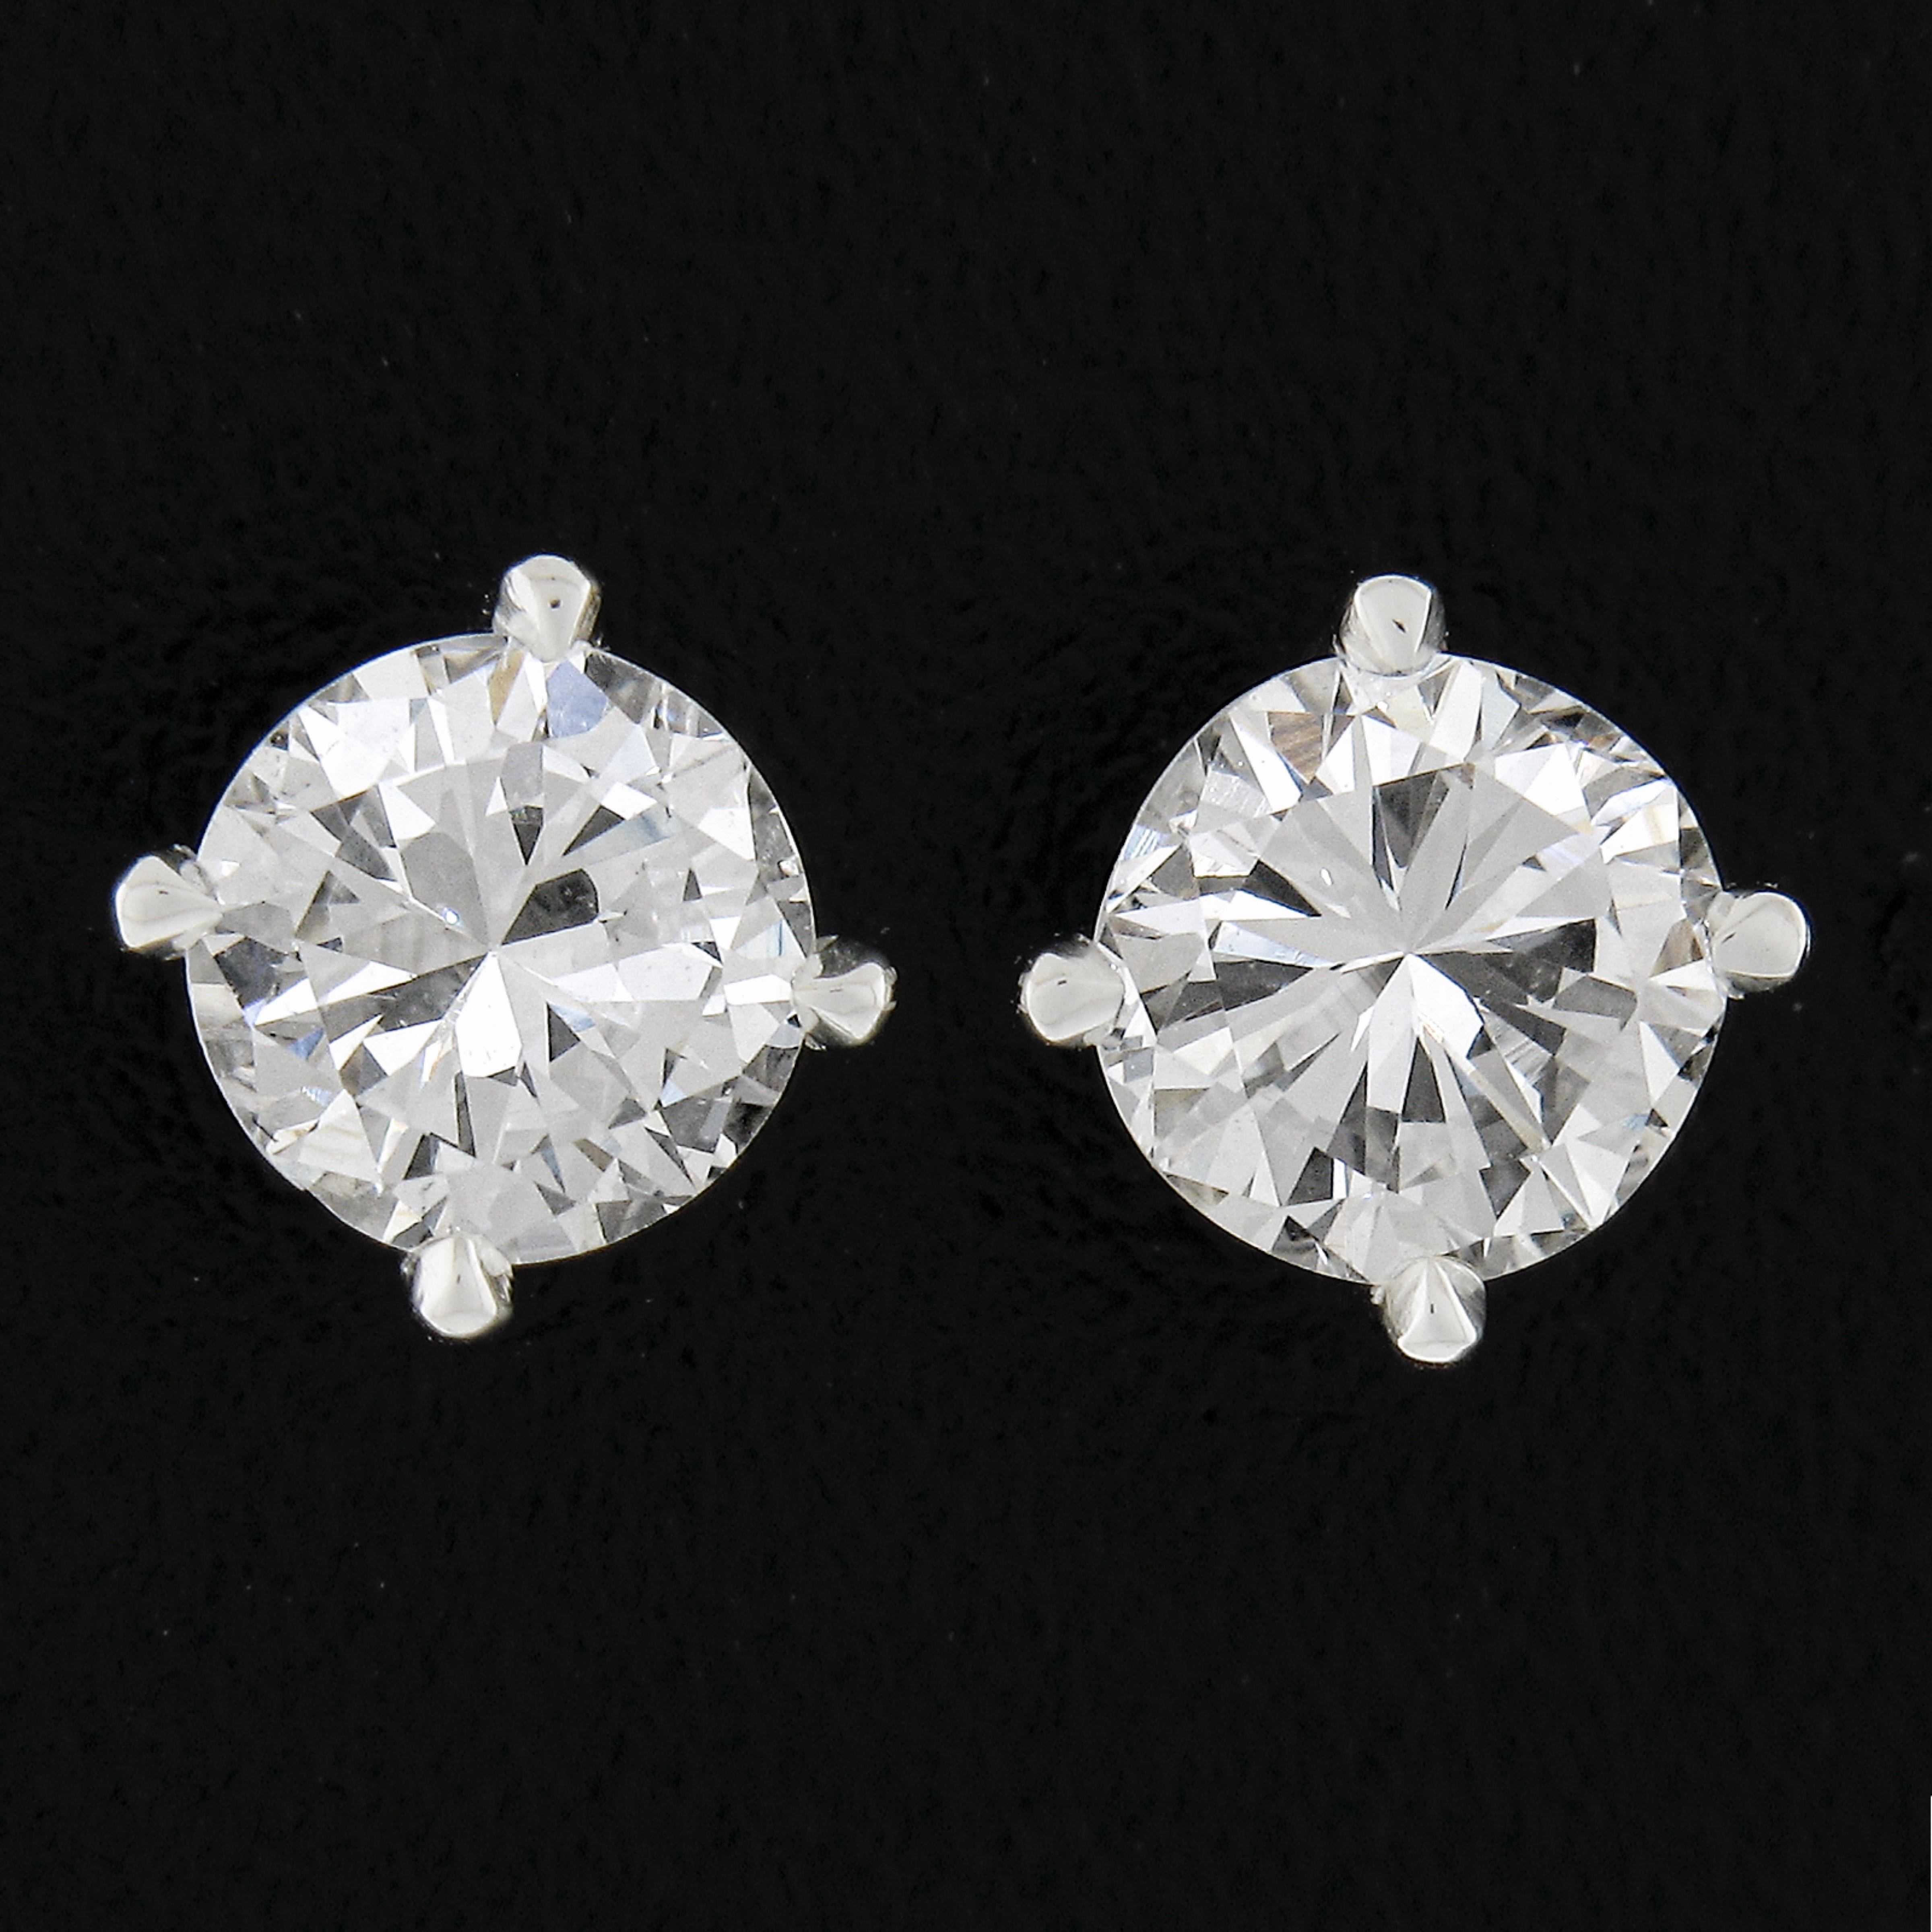 Here we have a brand new classic pair of stud earrings. They feature a pair of genuine natural diamonds with a round brilliant cut that together total exactly 0.80 carats in weight. You will find yourself wearing these studs every day, comfortably